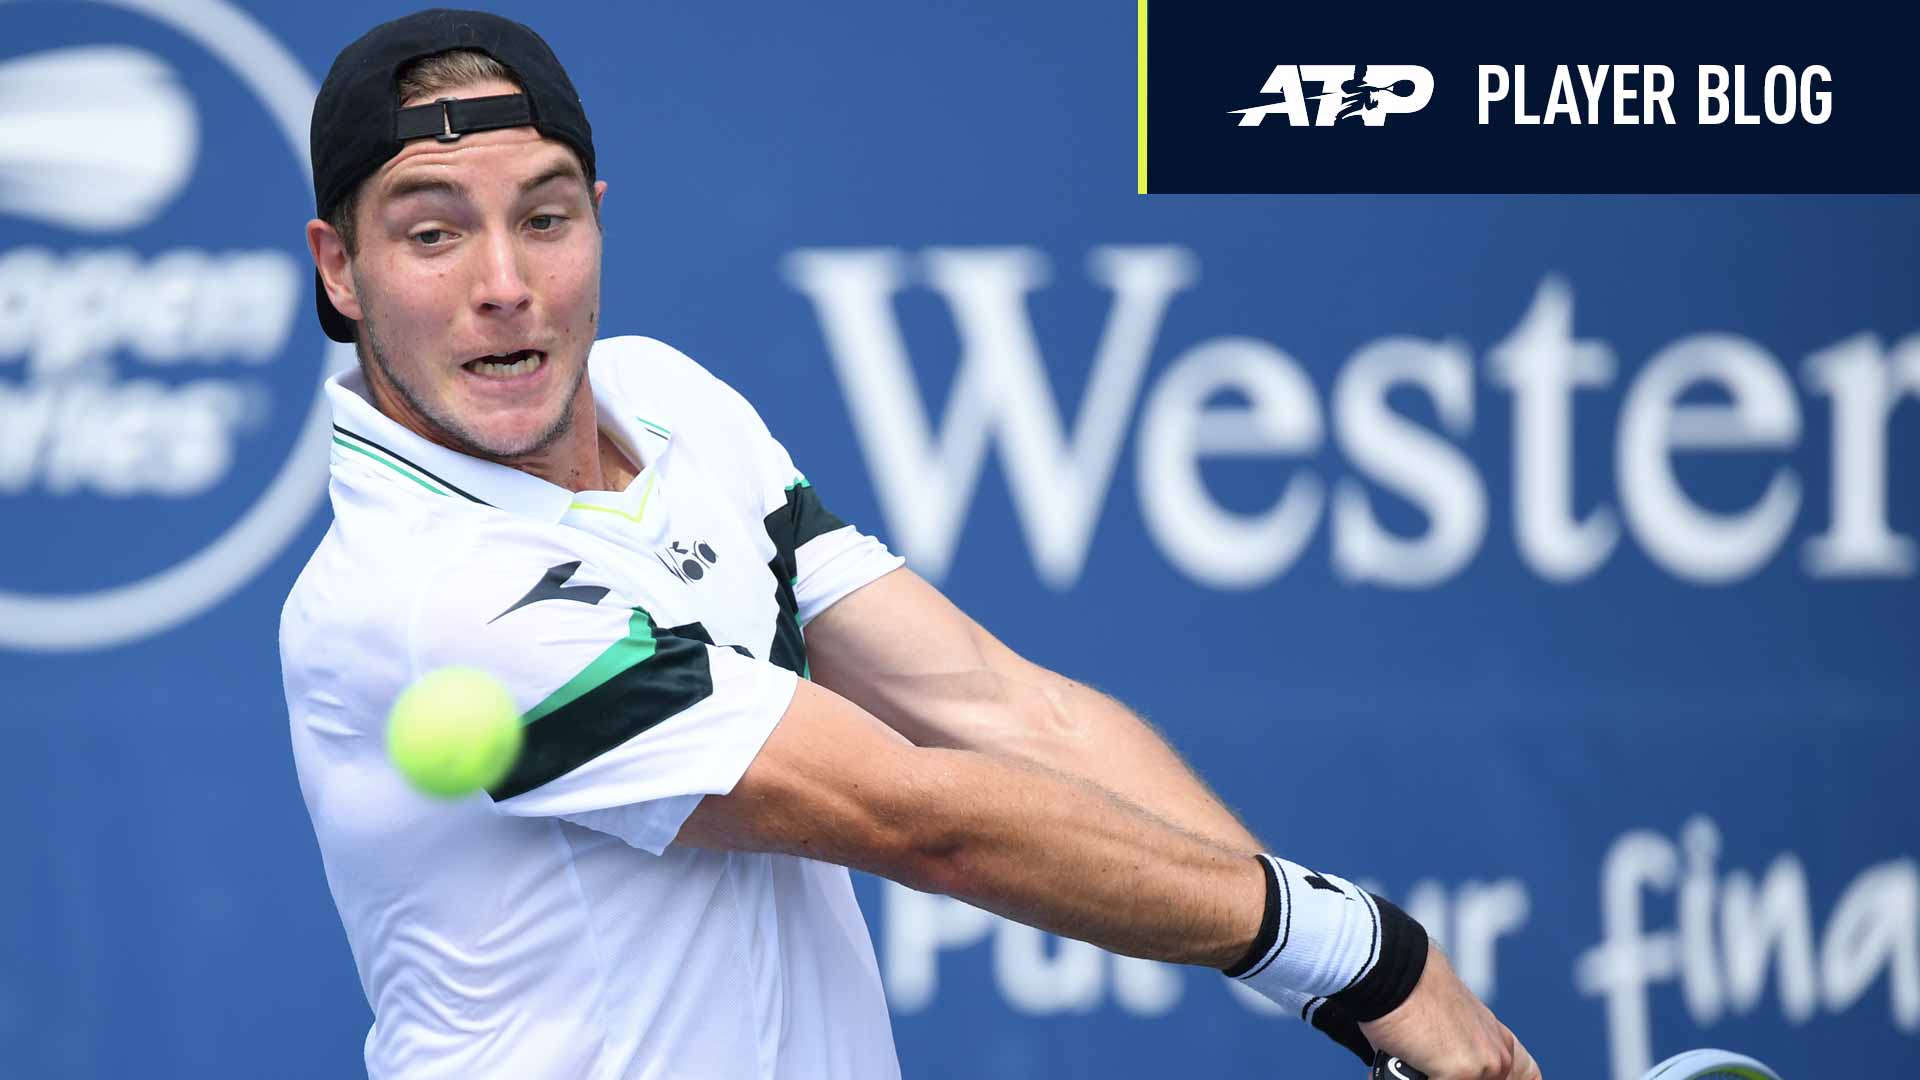 Jan-Lennard Struff takes fans behind the scenes to see what a day is like for a player at the Western & Southern Open.